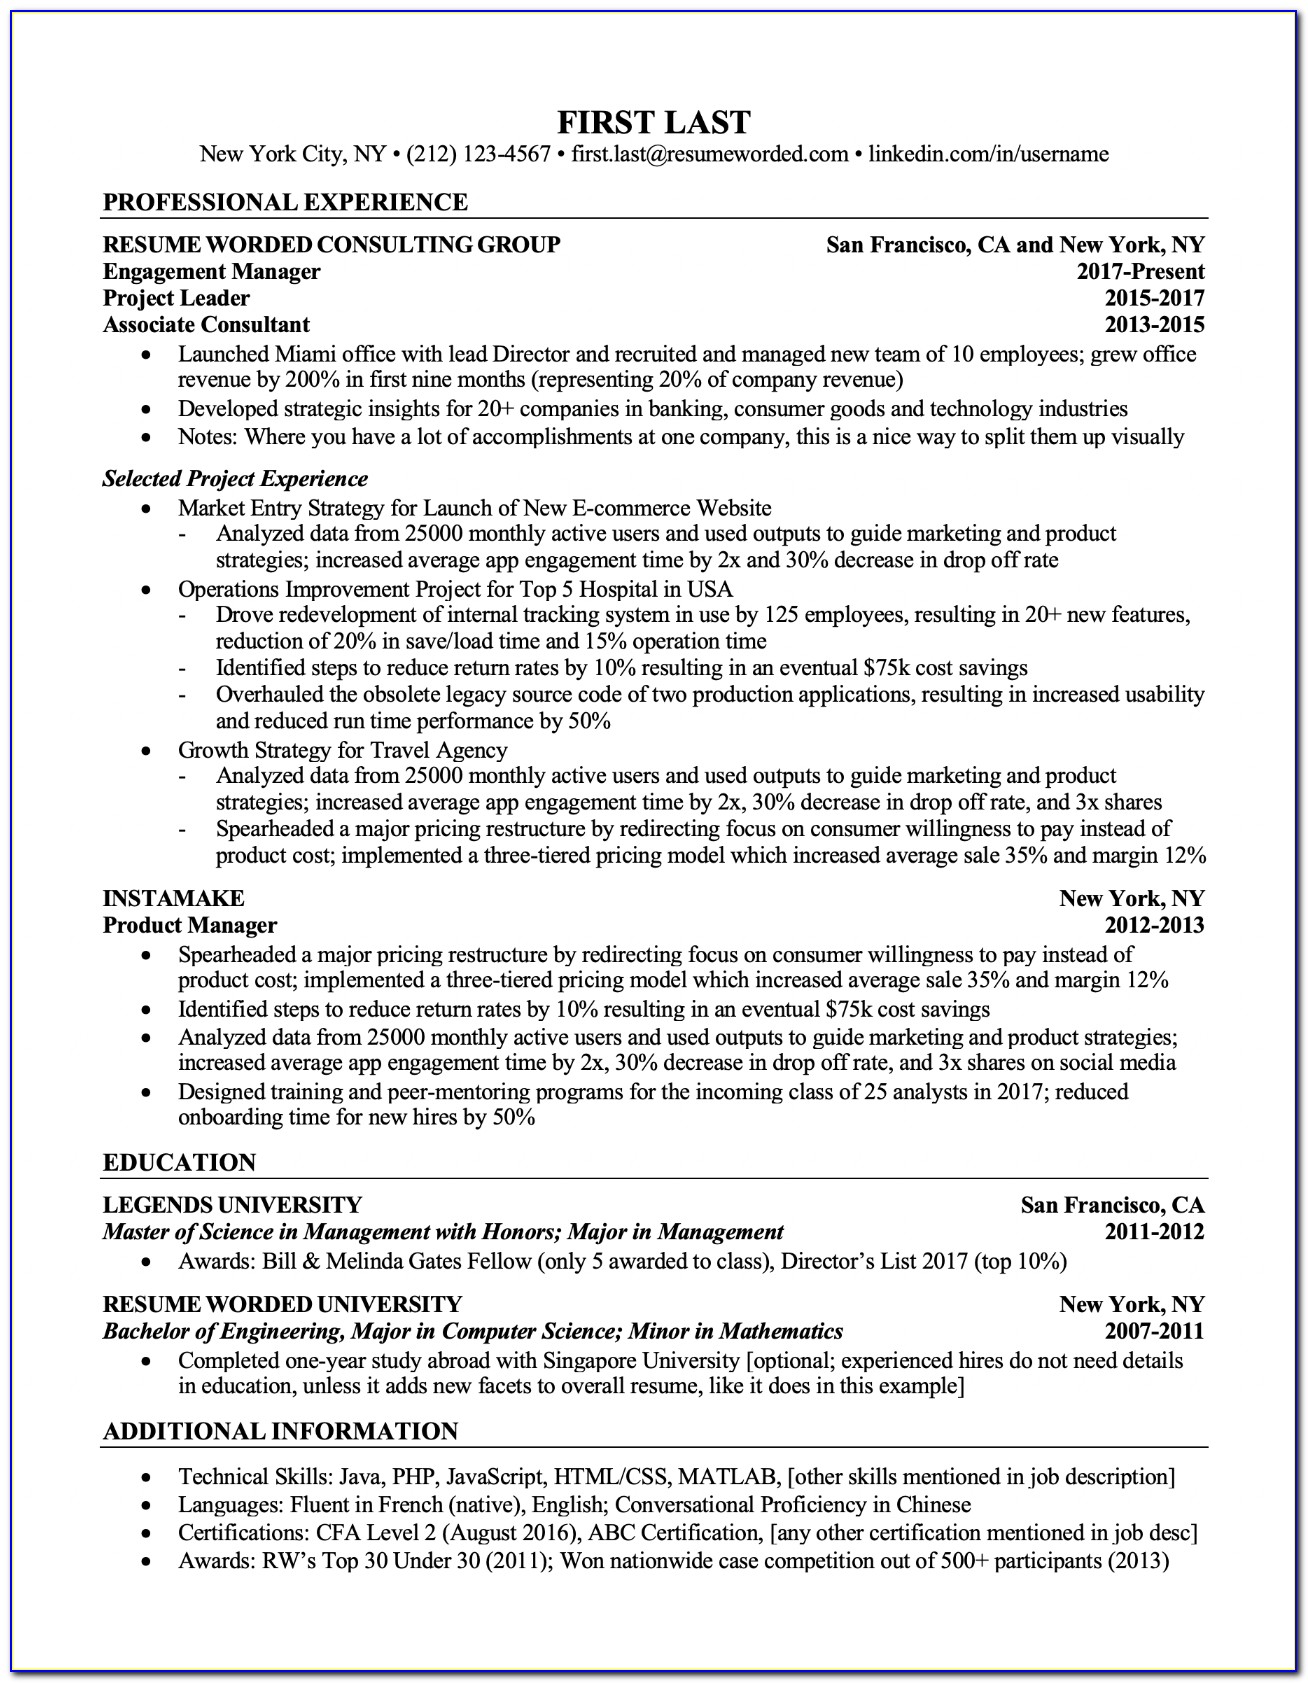 What Is An Ats Compliant Resume